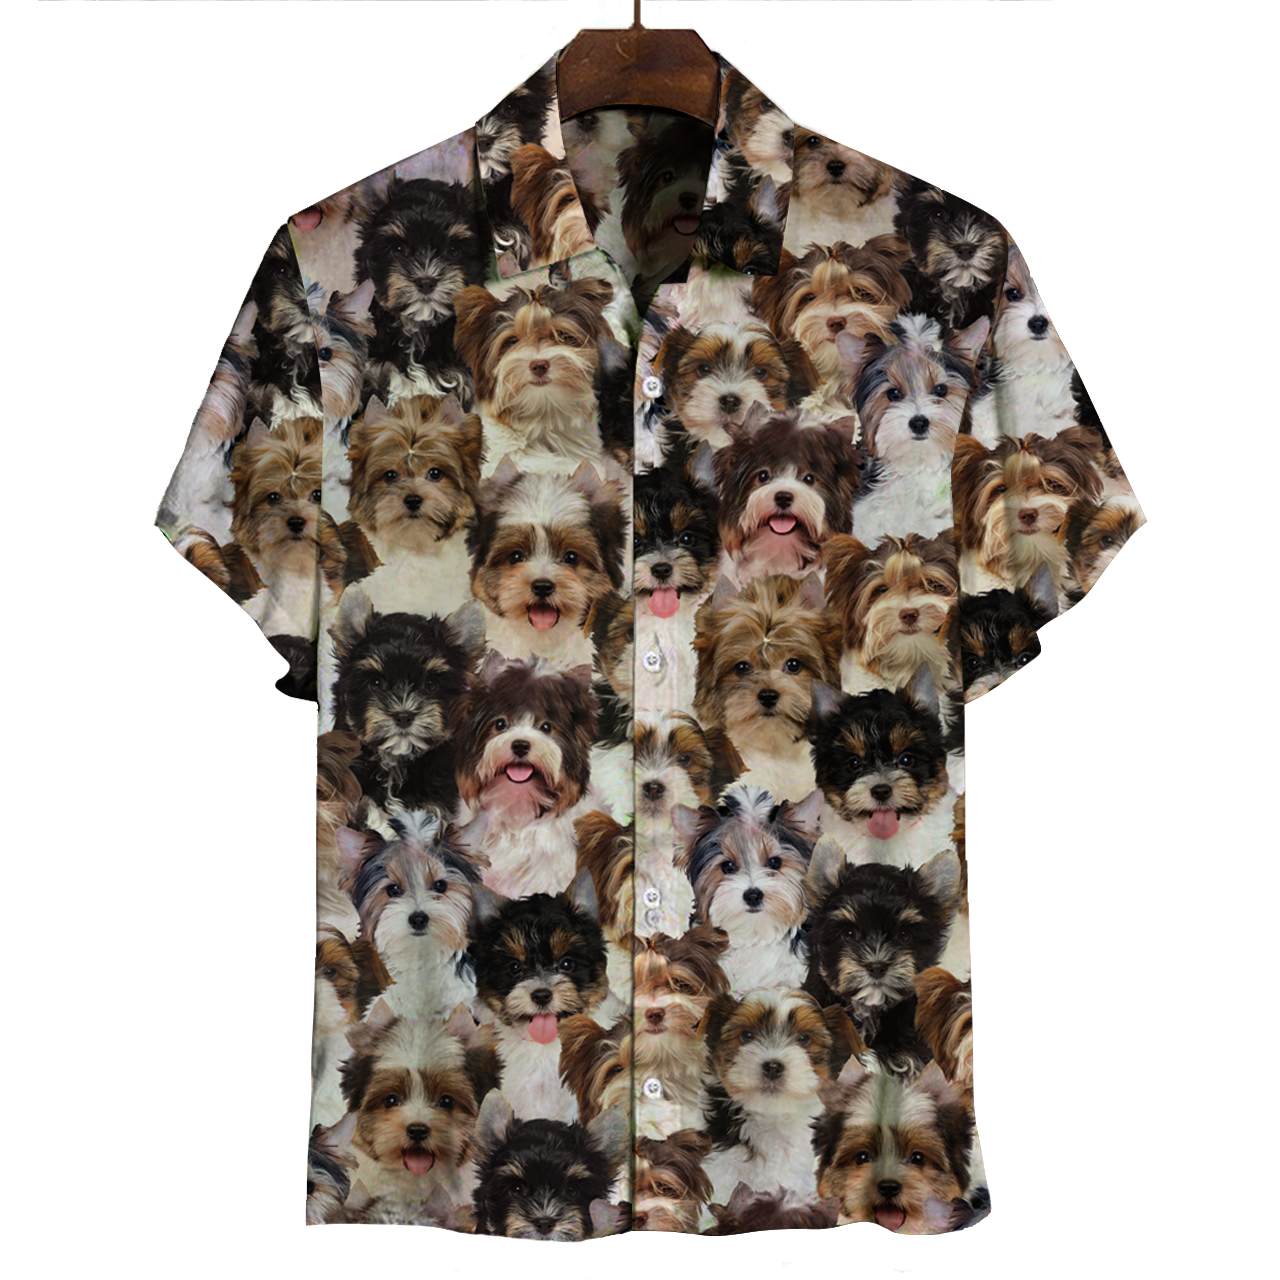 You Will Have A Bunch Of Biewer Terriers - Shirt V1